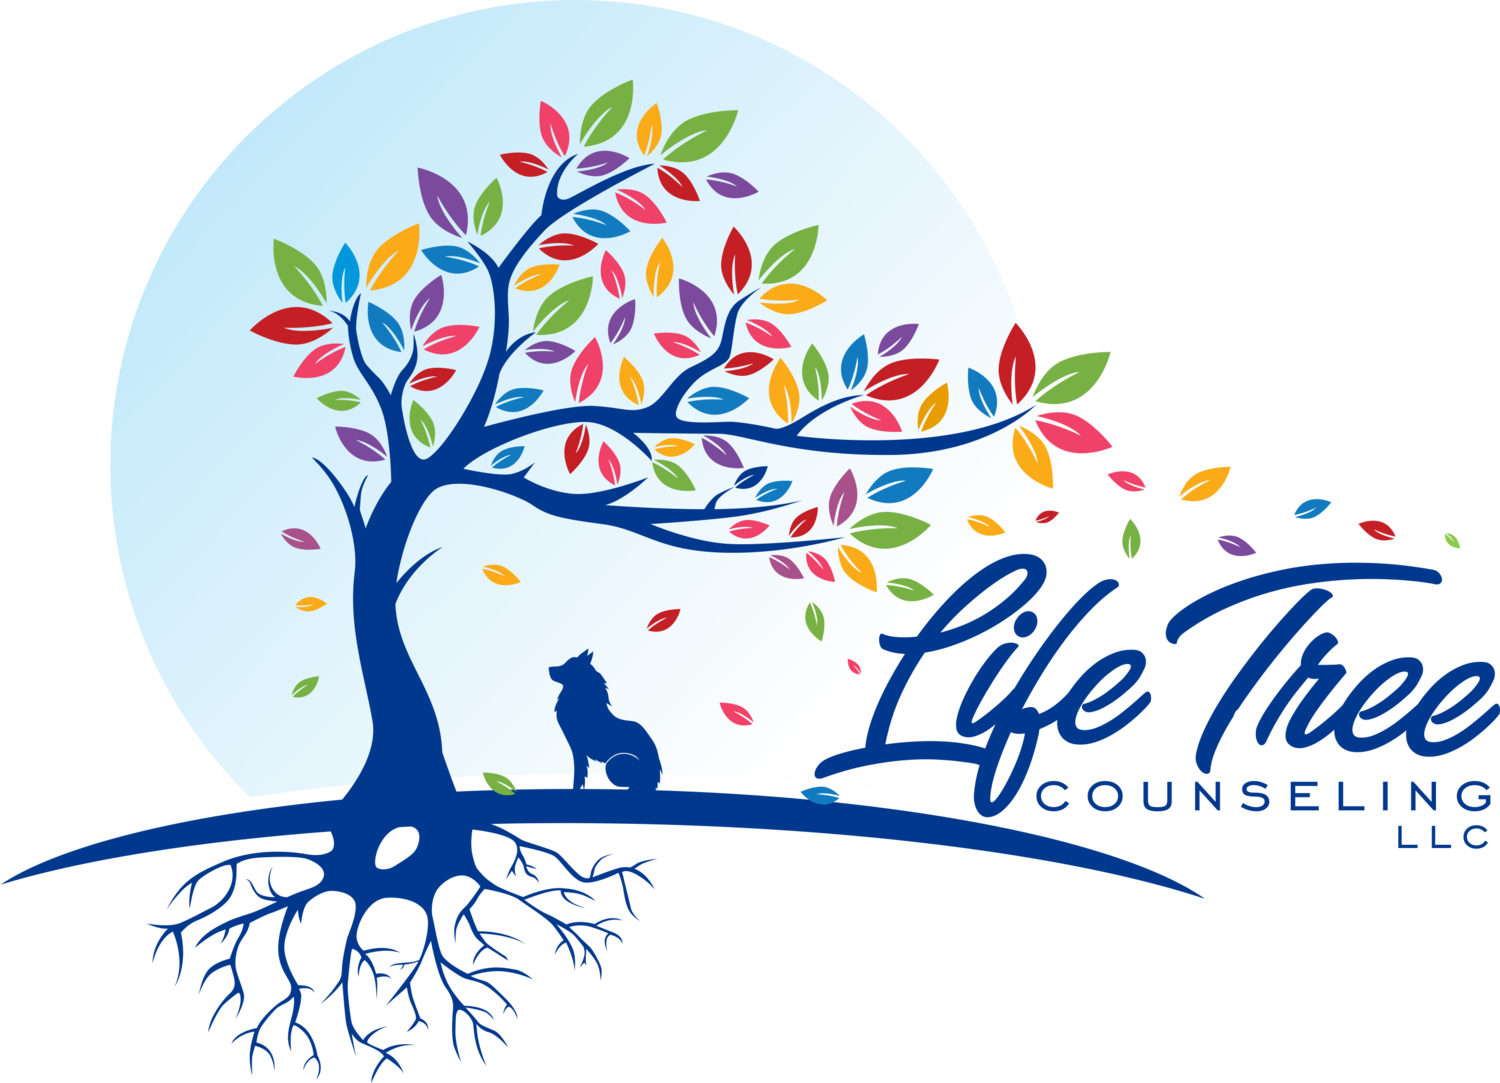 Life Tree Counseling